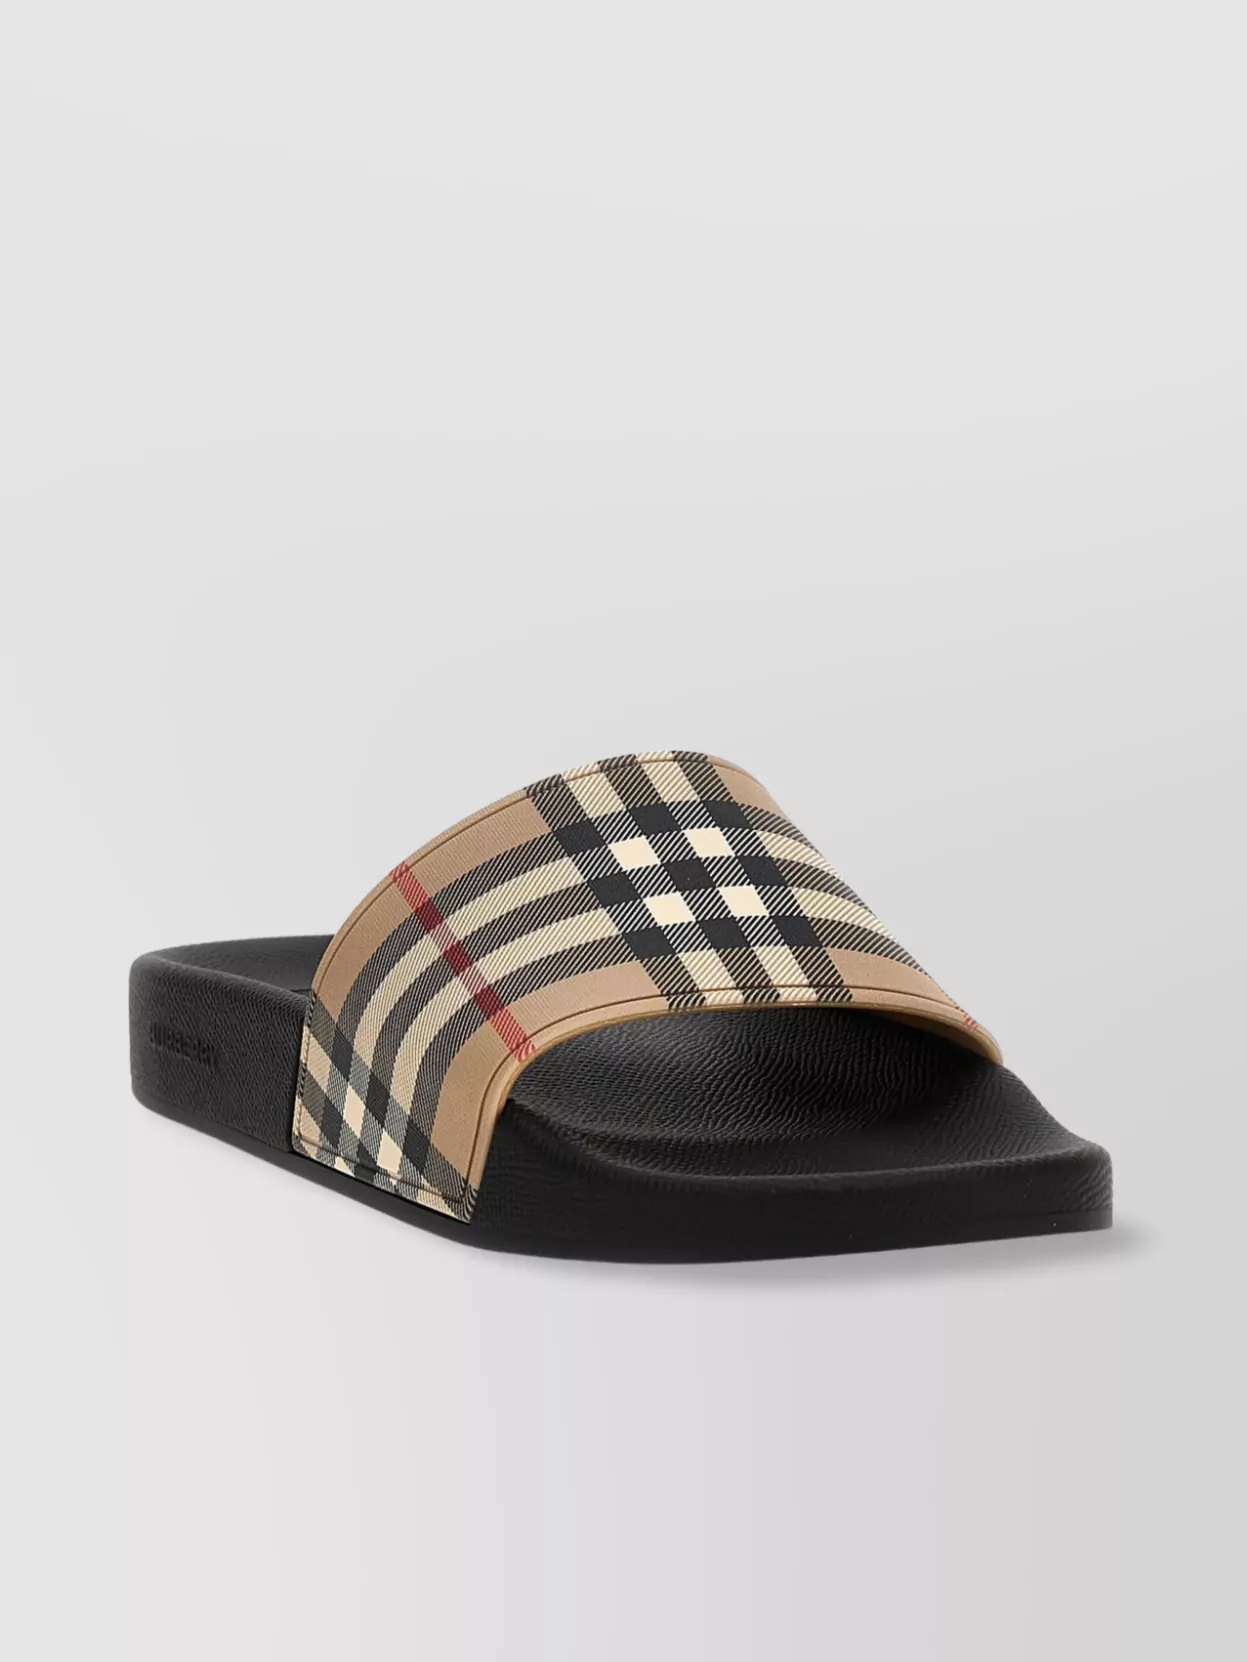 Burberry Checkered Open Toe Flat Sole Sandals